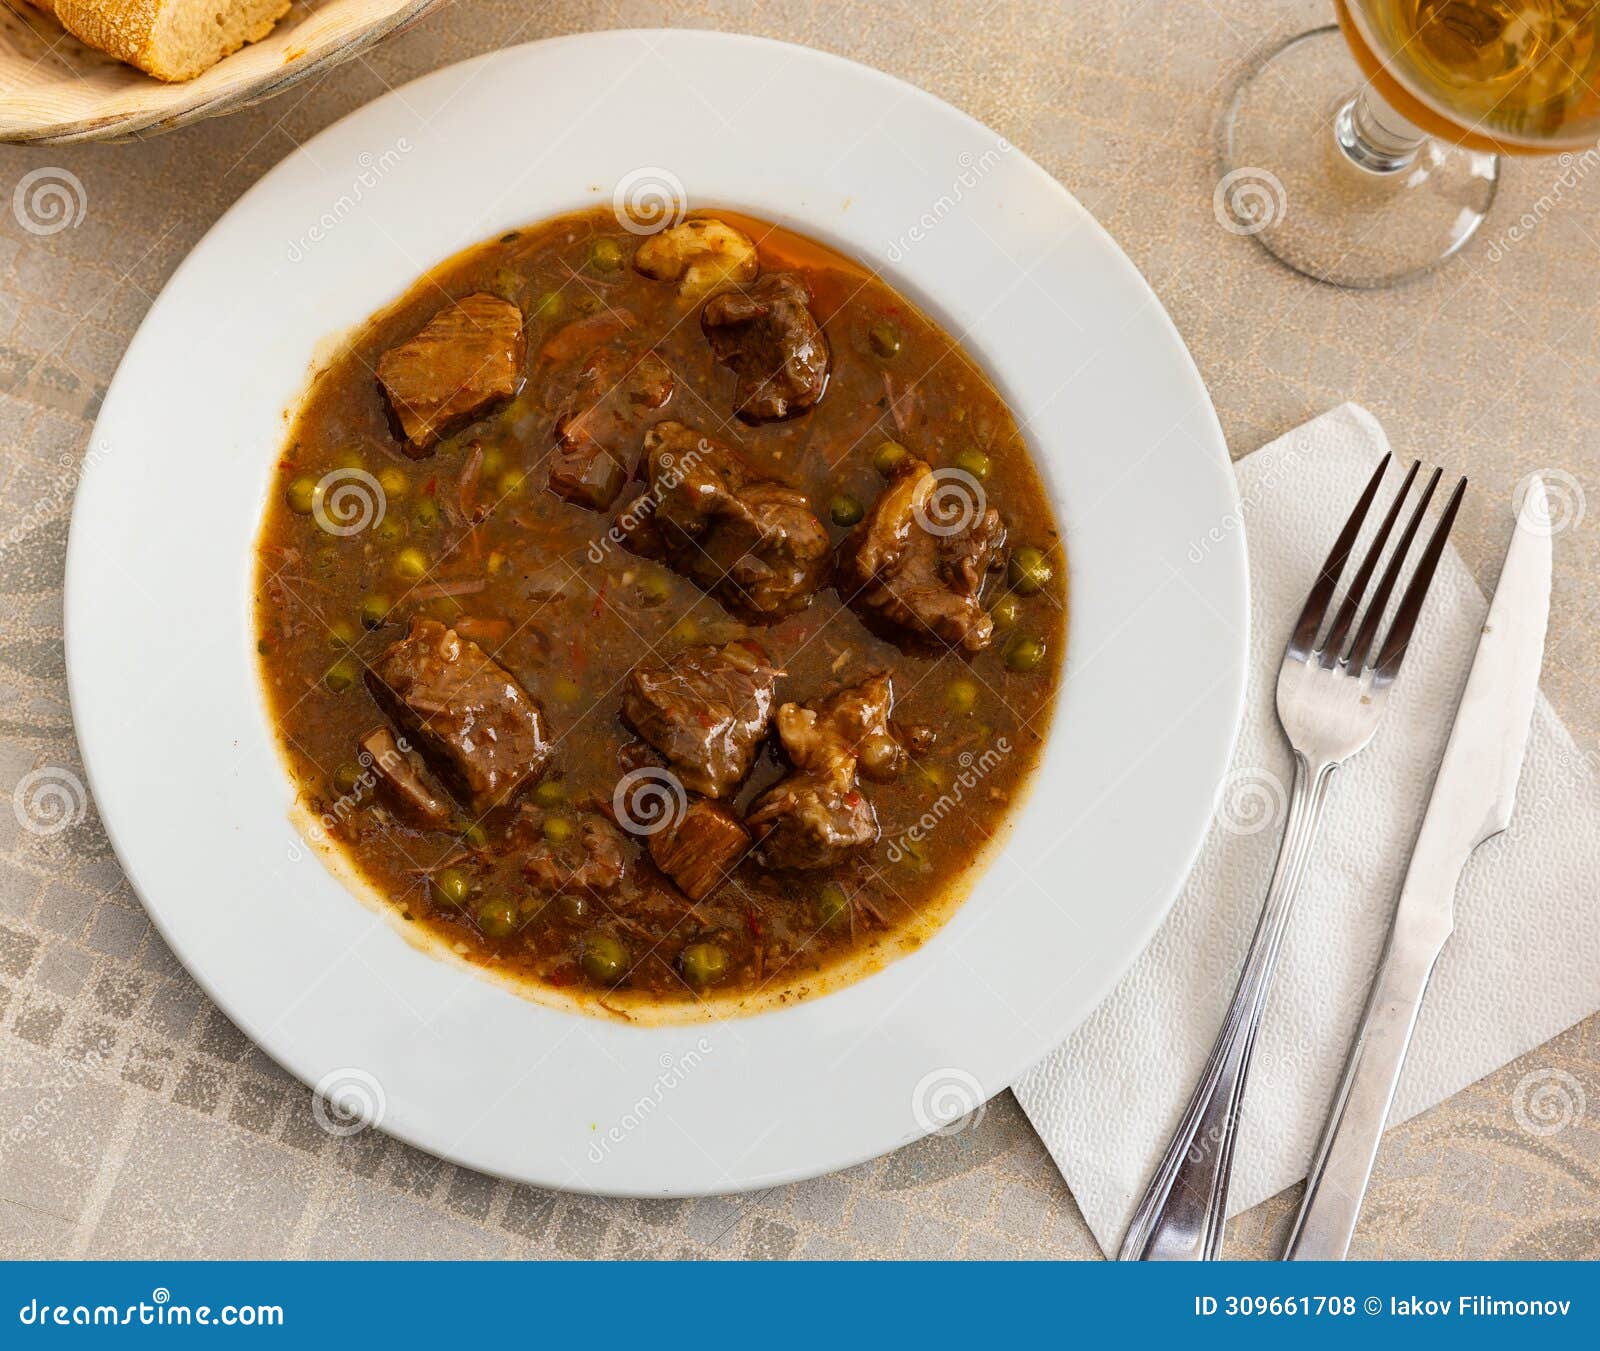 stewed beef with vegetables (ternera la jardinera) - this is spanish traditional meat dish